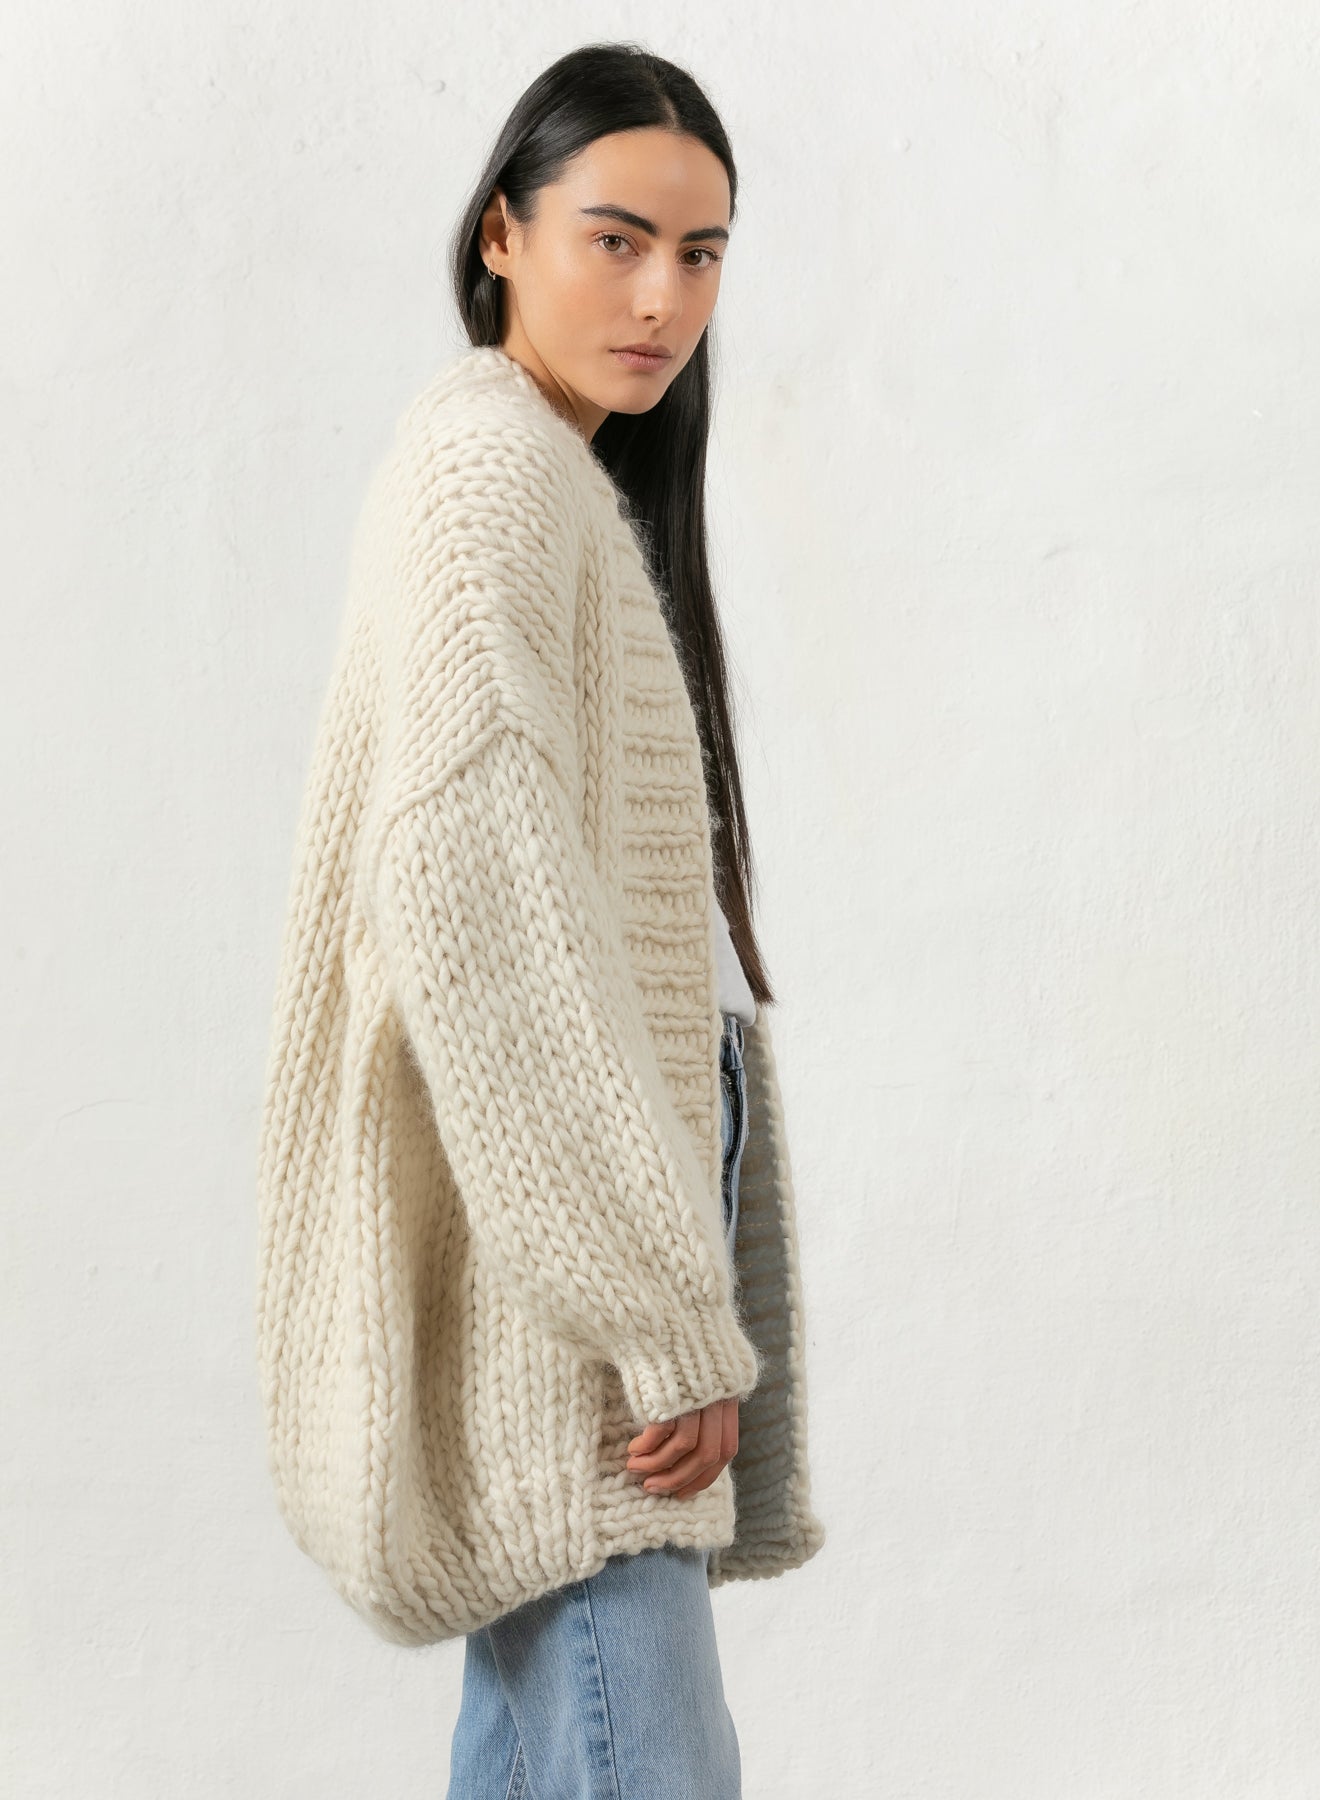 cream cardigan chunky mr mittens knit knitwear winter collection outerwear